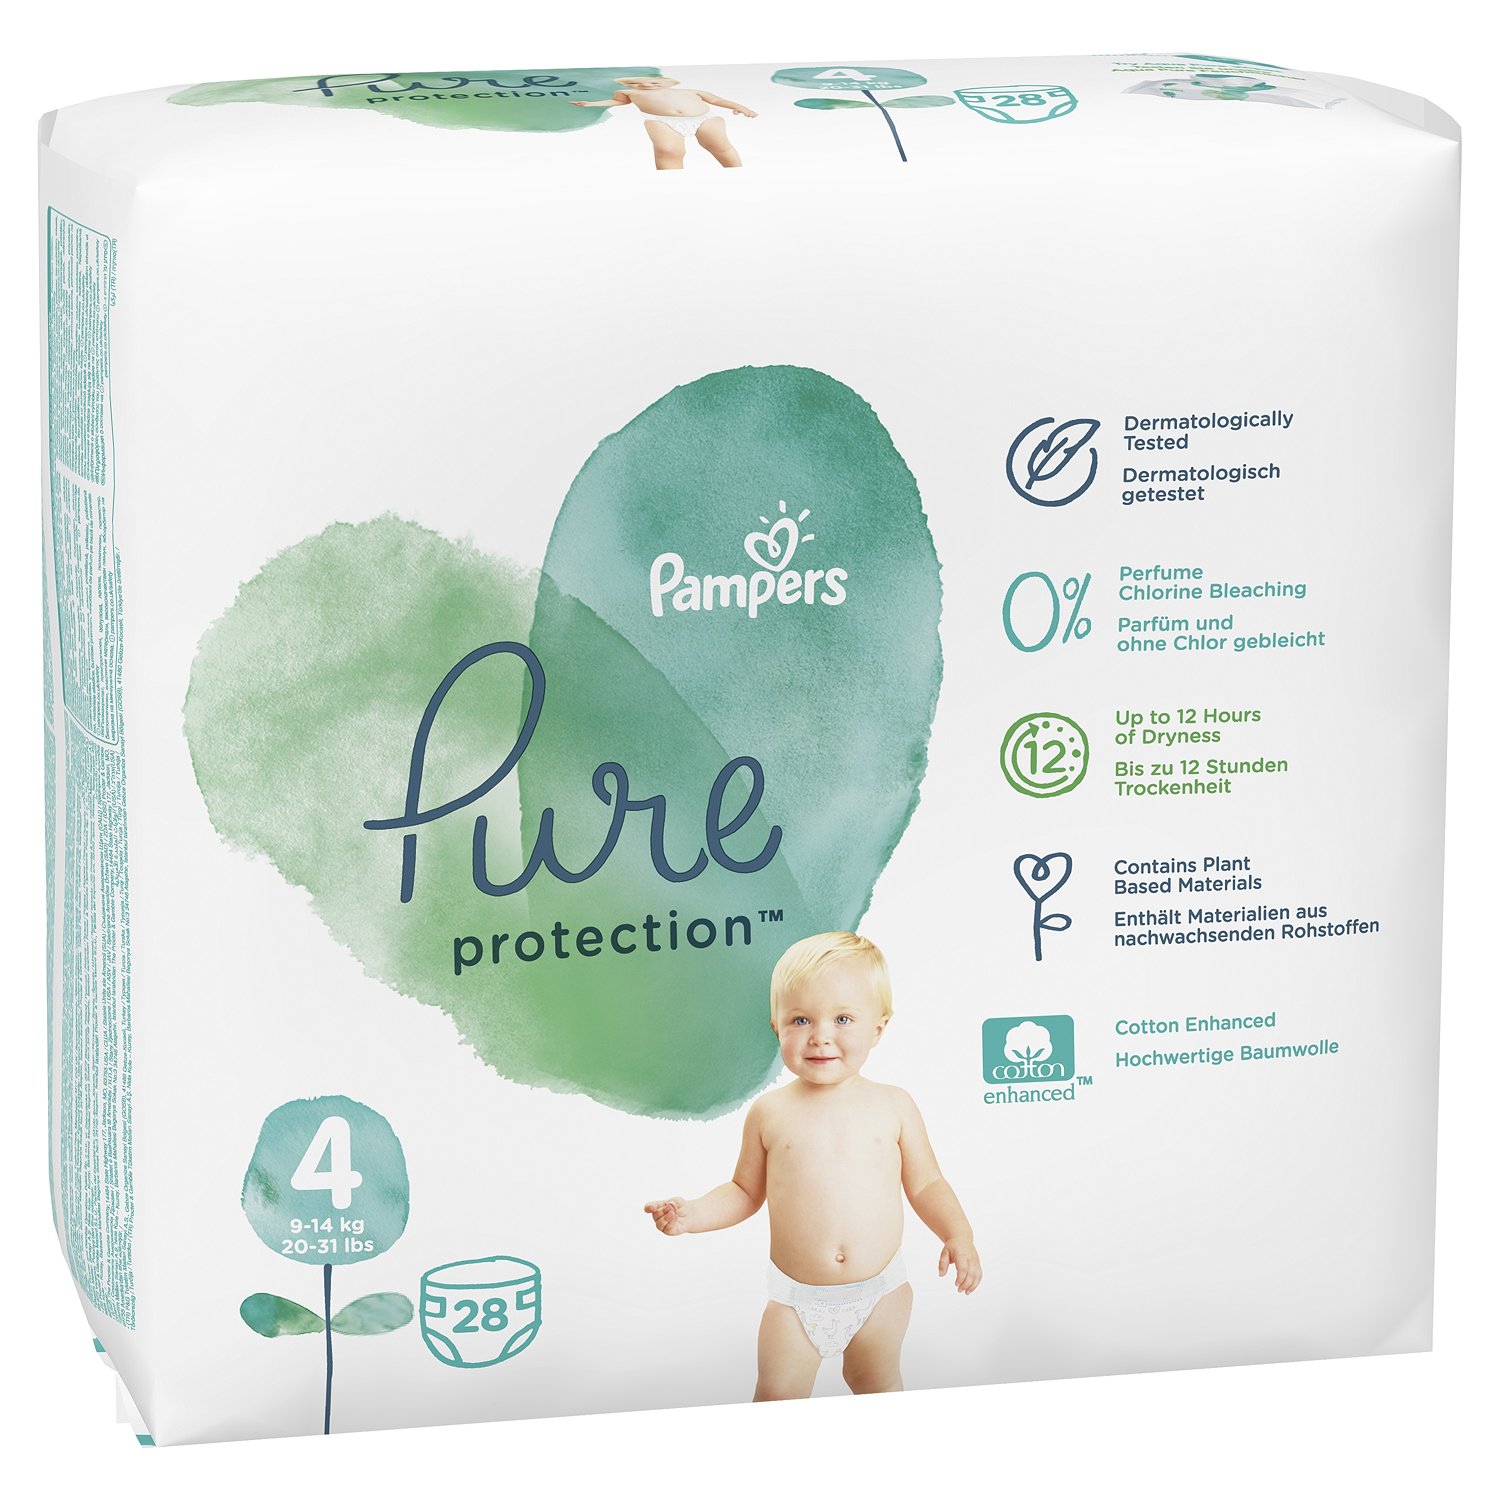 Pampers pure protection 1